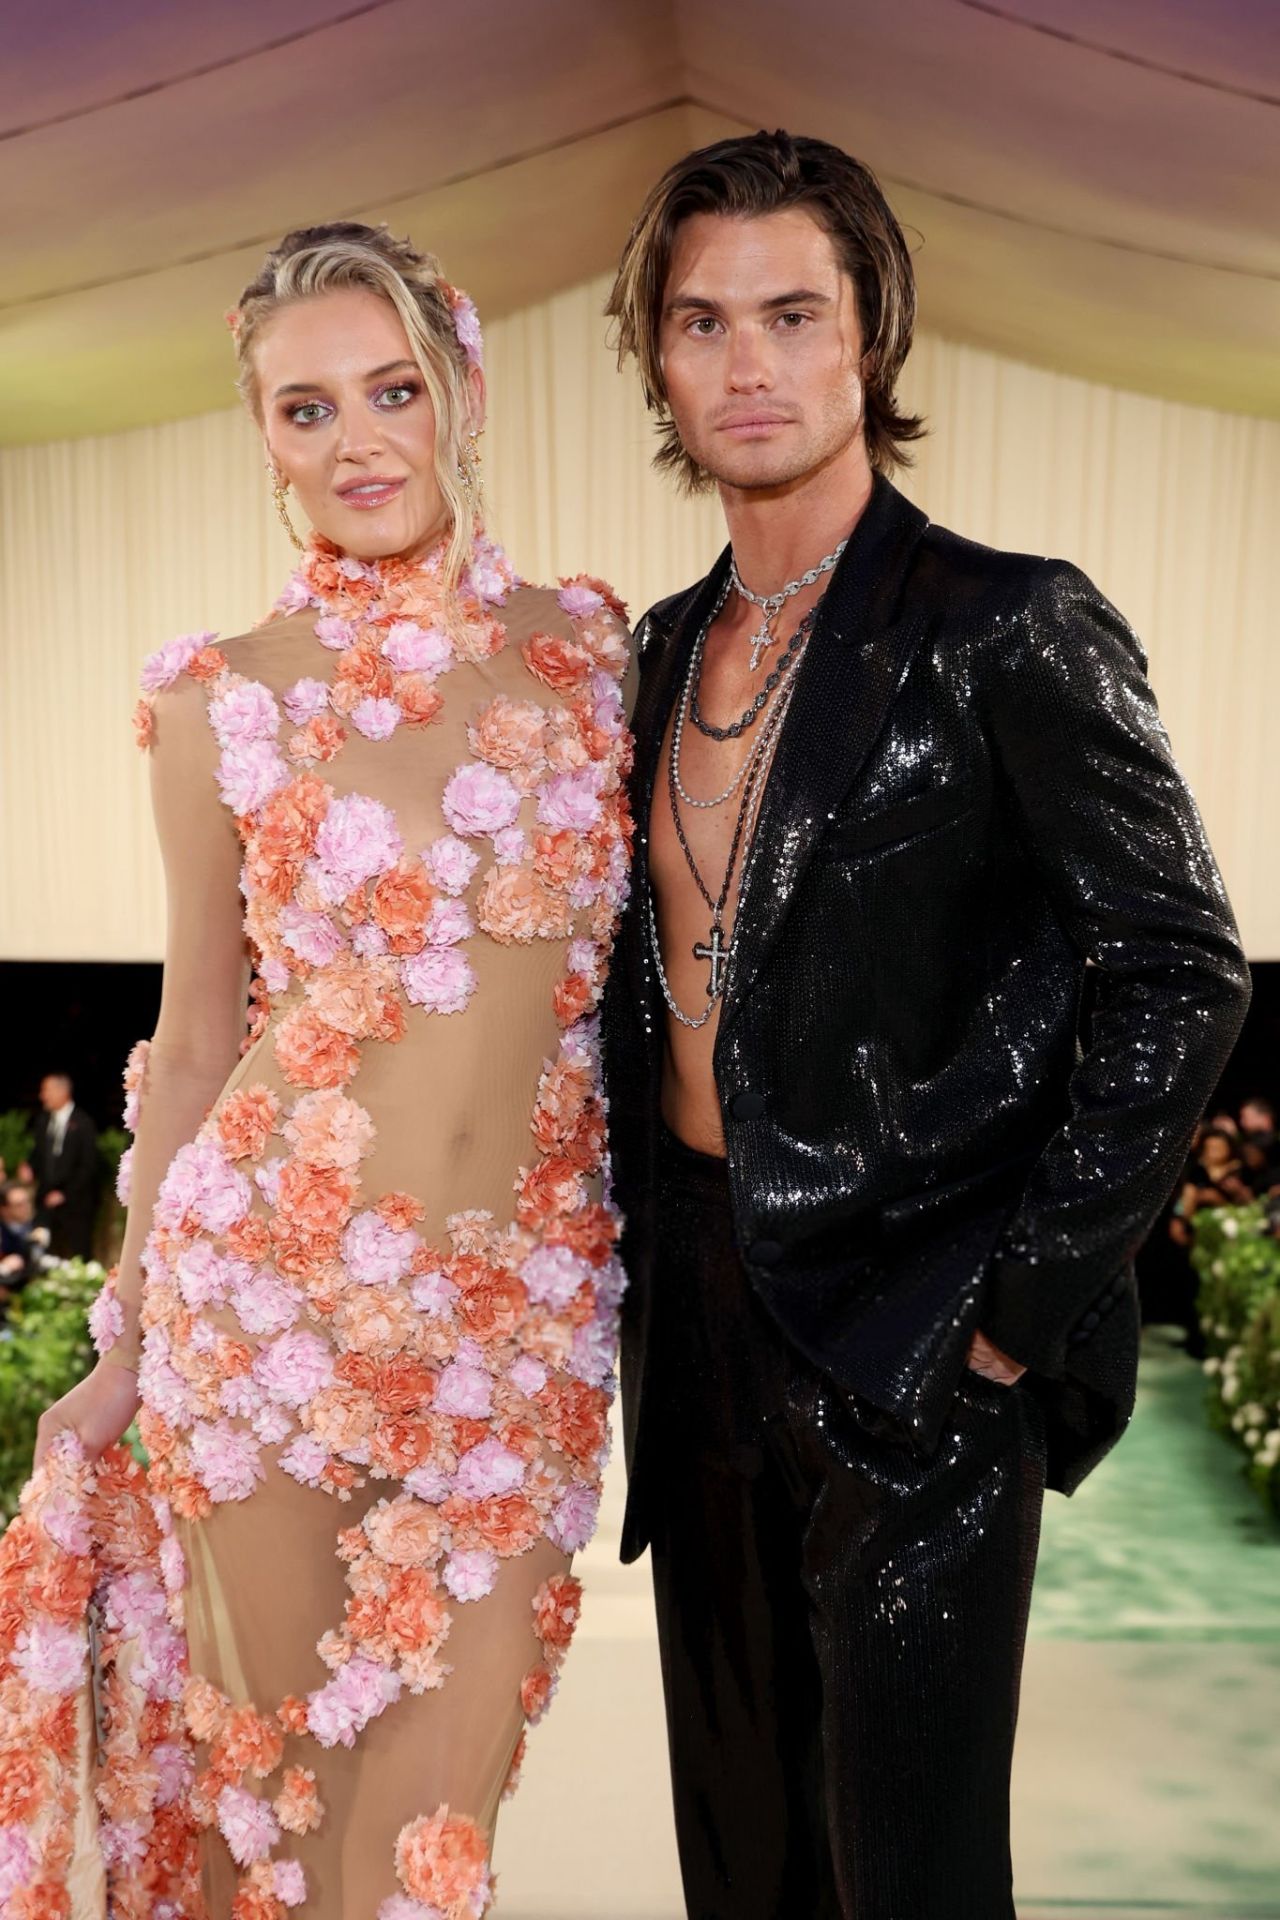 KELSEA BALLERINI AND CHASE STOKES MAKE A STUNNING DEBUT AT THE 2024 MET GALA IN NEW YORK10